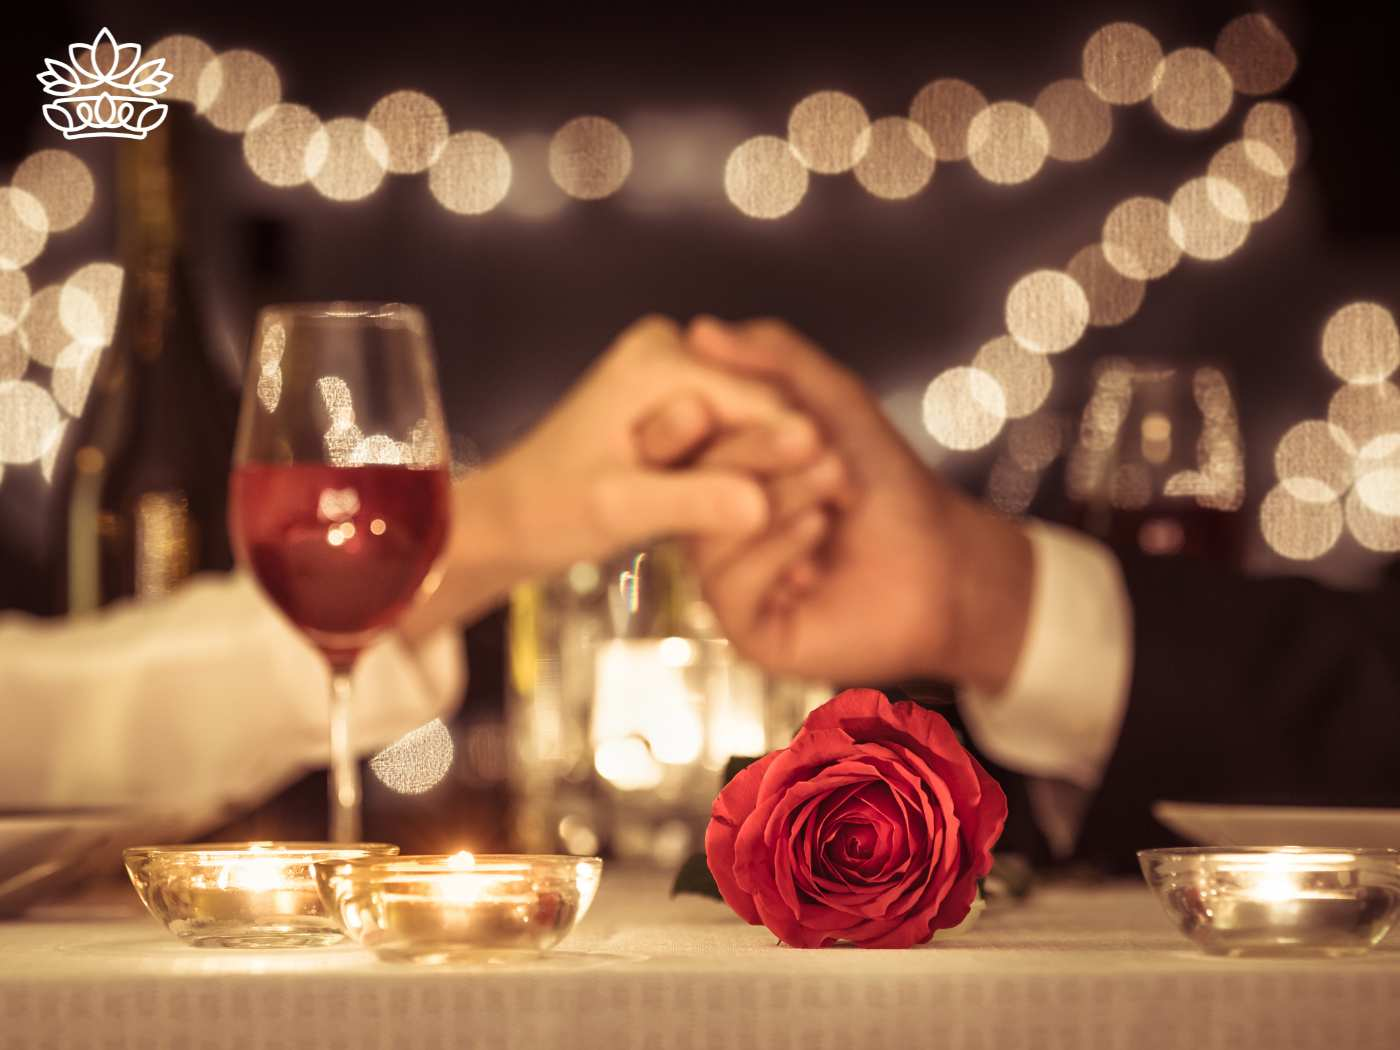 Romantic dinner setting for Valentine's Day with a couple holding hands over a candlelit table, a red rose and a glass of wine in the foreground, creating a warm, intimate atmosphere. Fabulous Flowers and Gifts. Delivered with Heart.